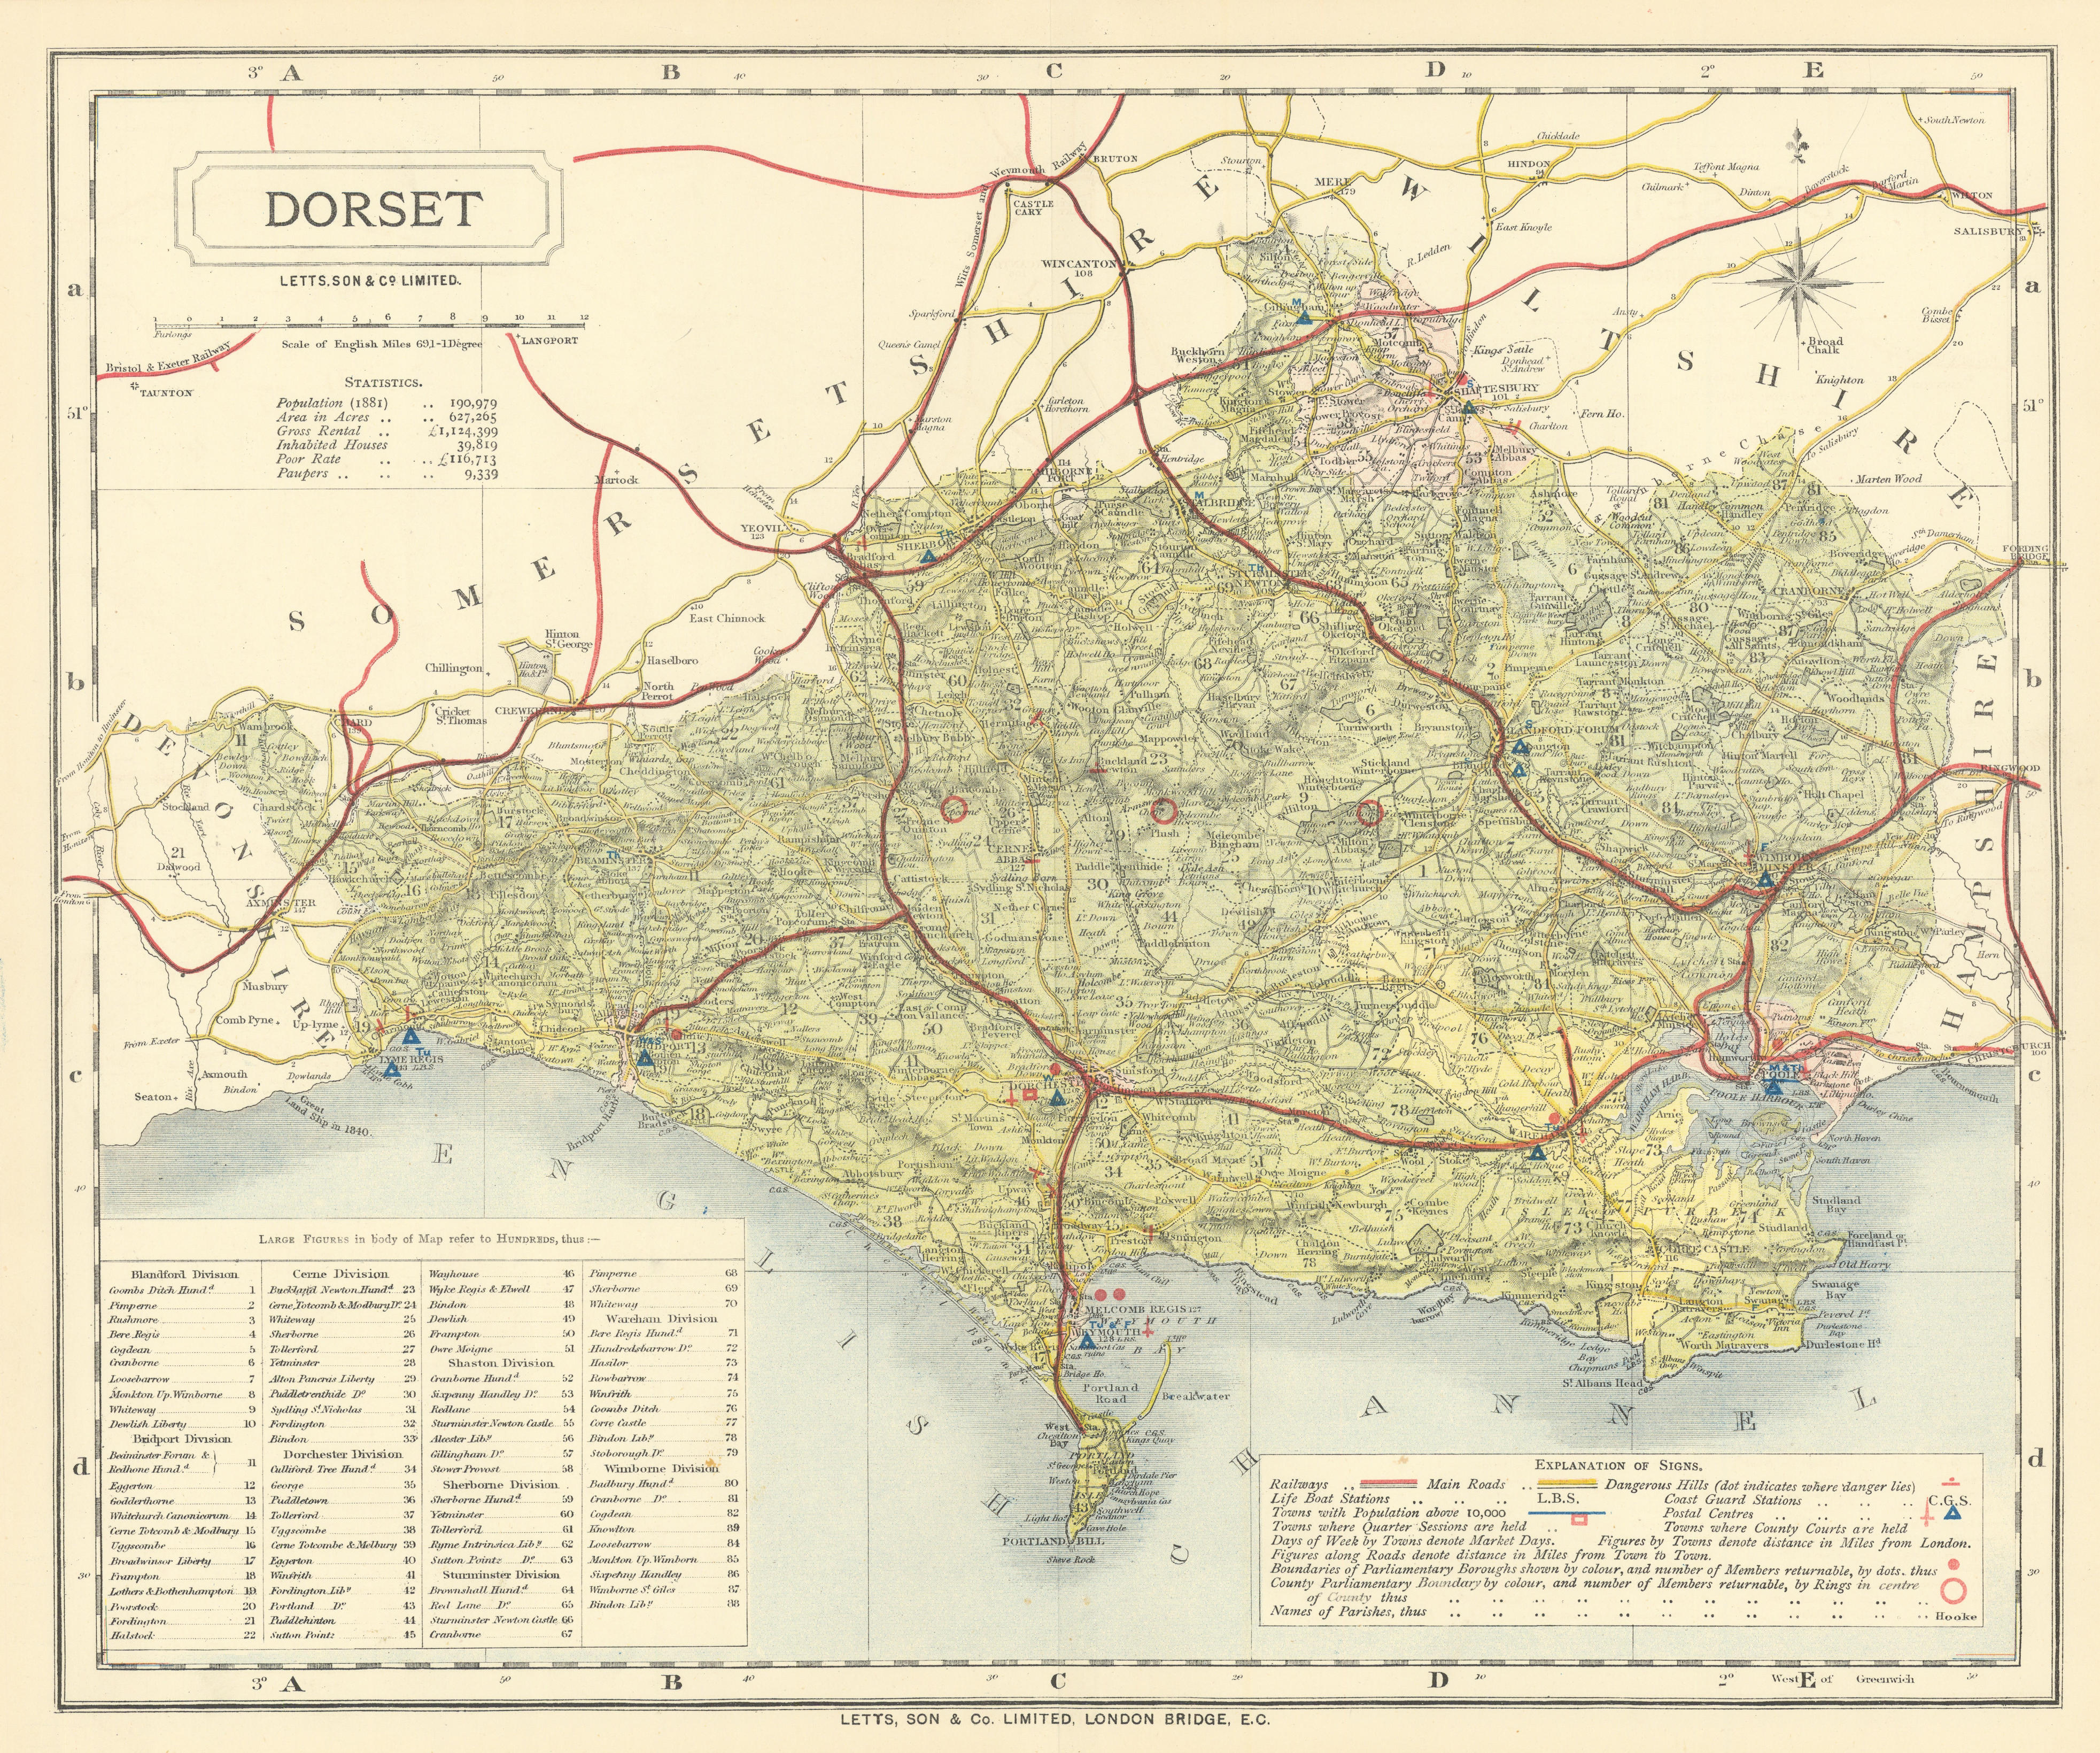 Associate Product Dorset county map showing Post Towns & Market Days. LETTS 1884 old antique